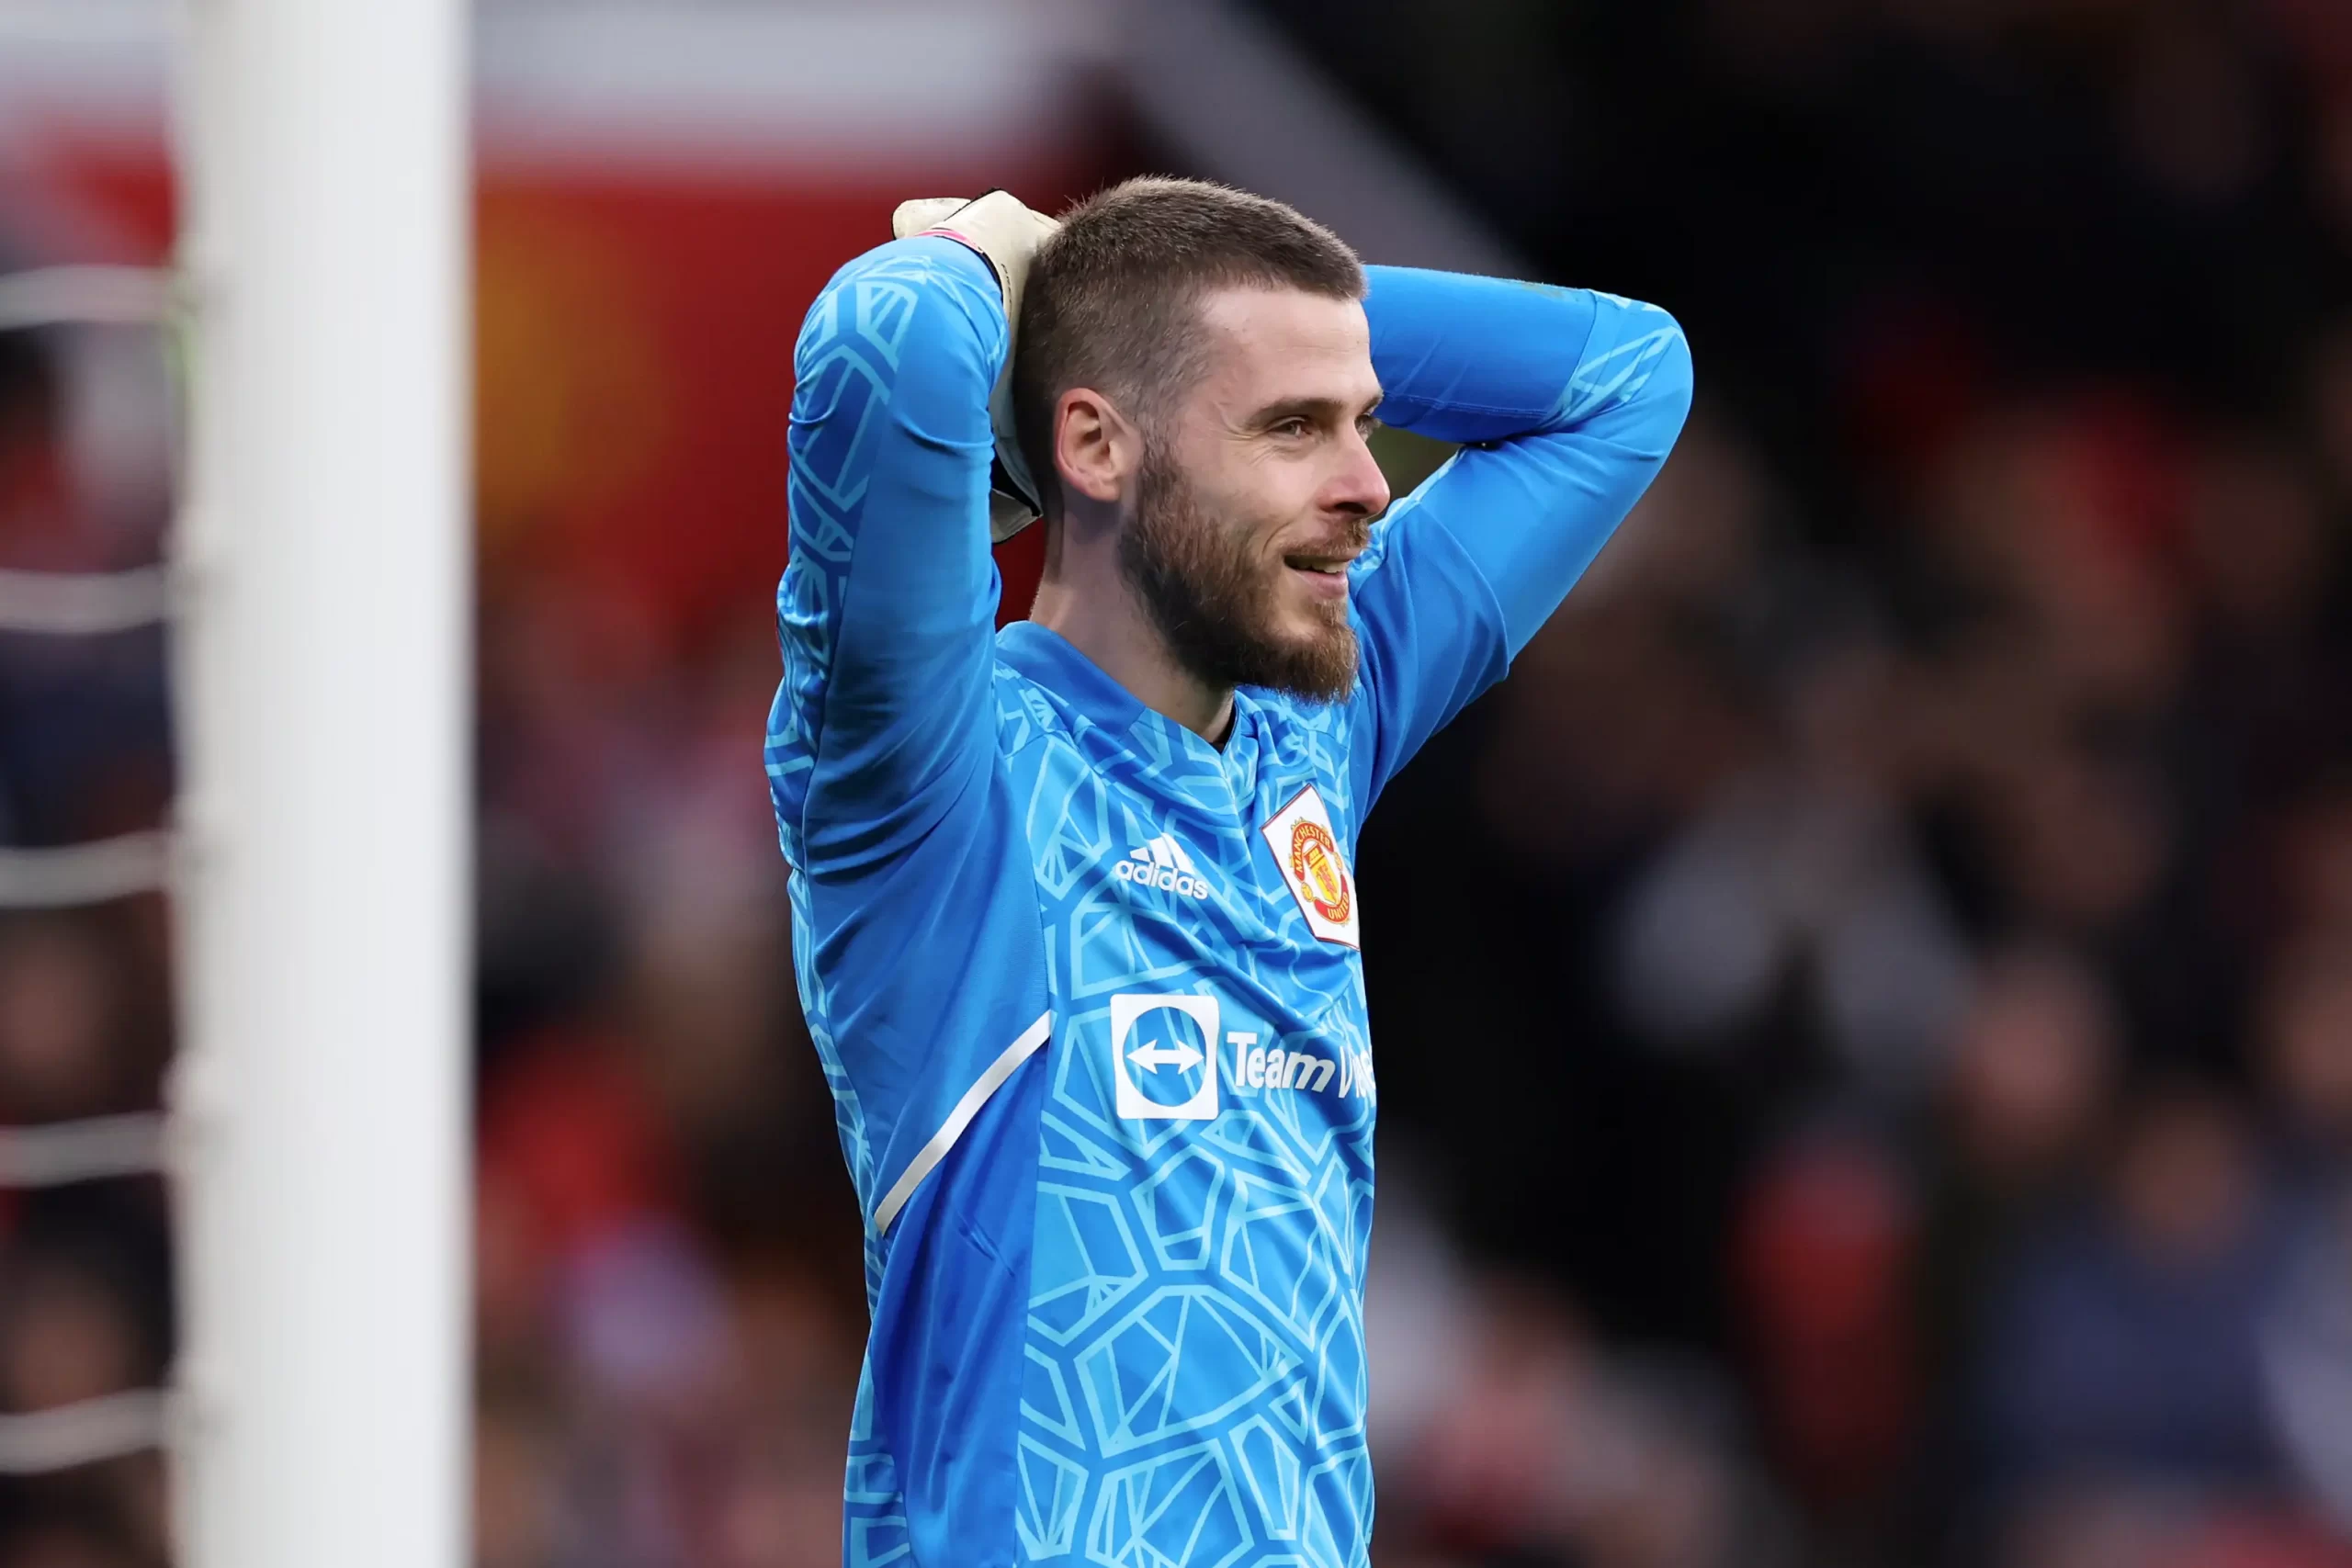 New training video shows David de Gea might not be over Manchester United yet